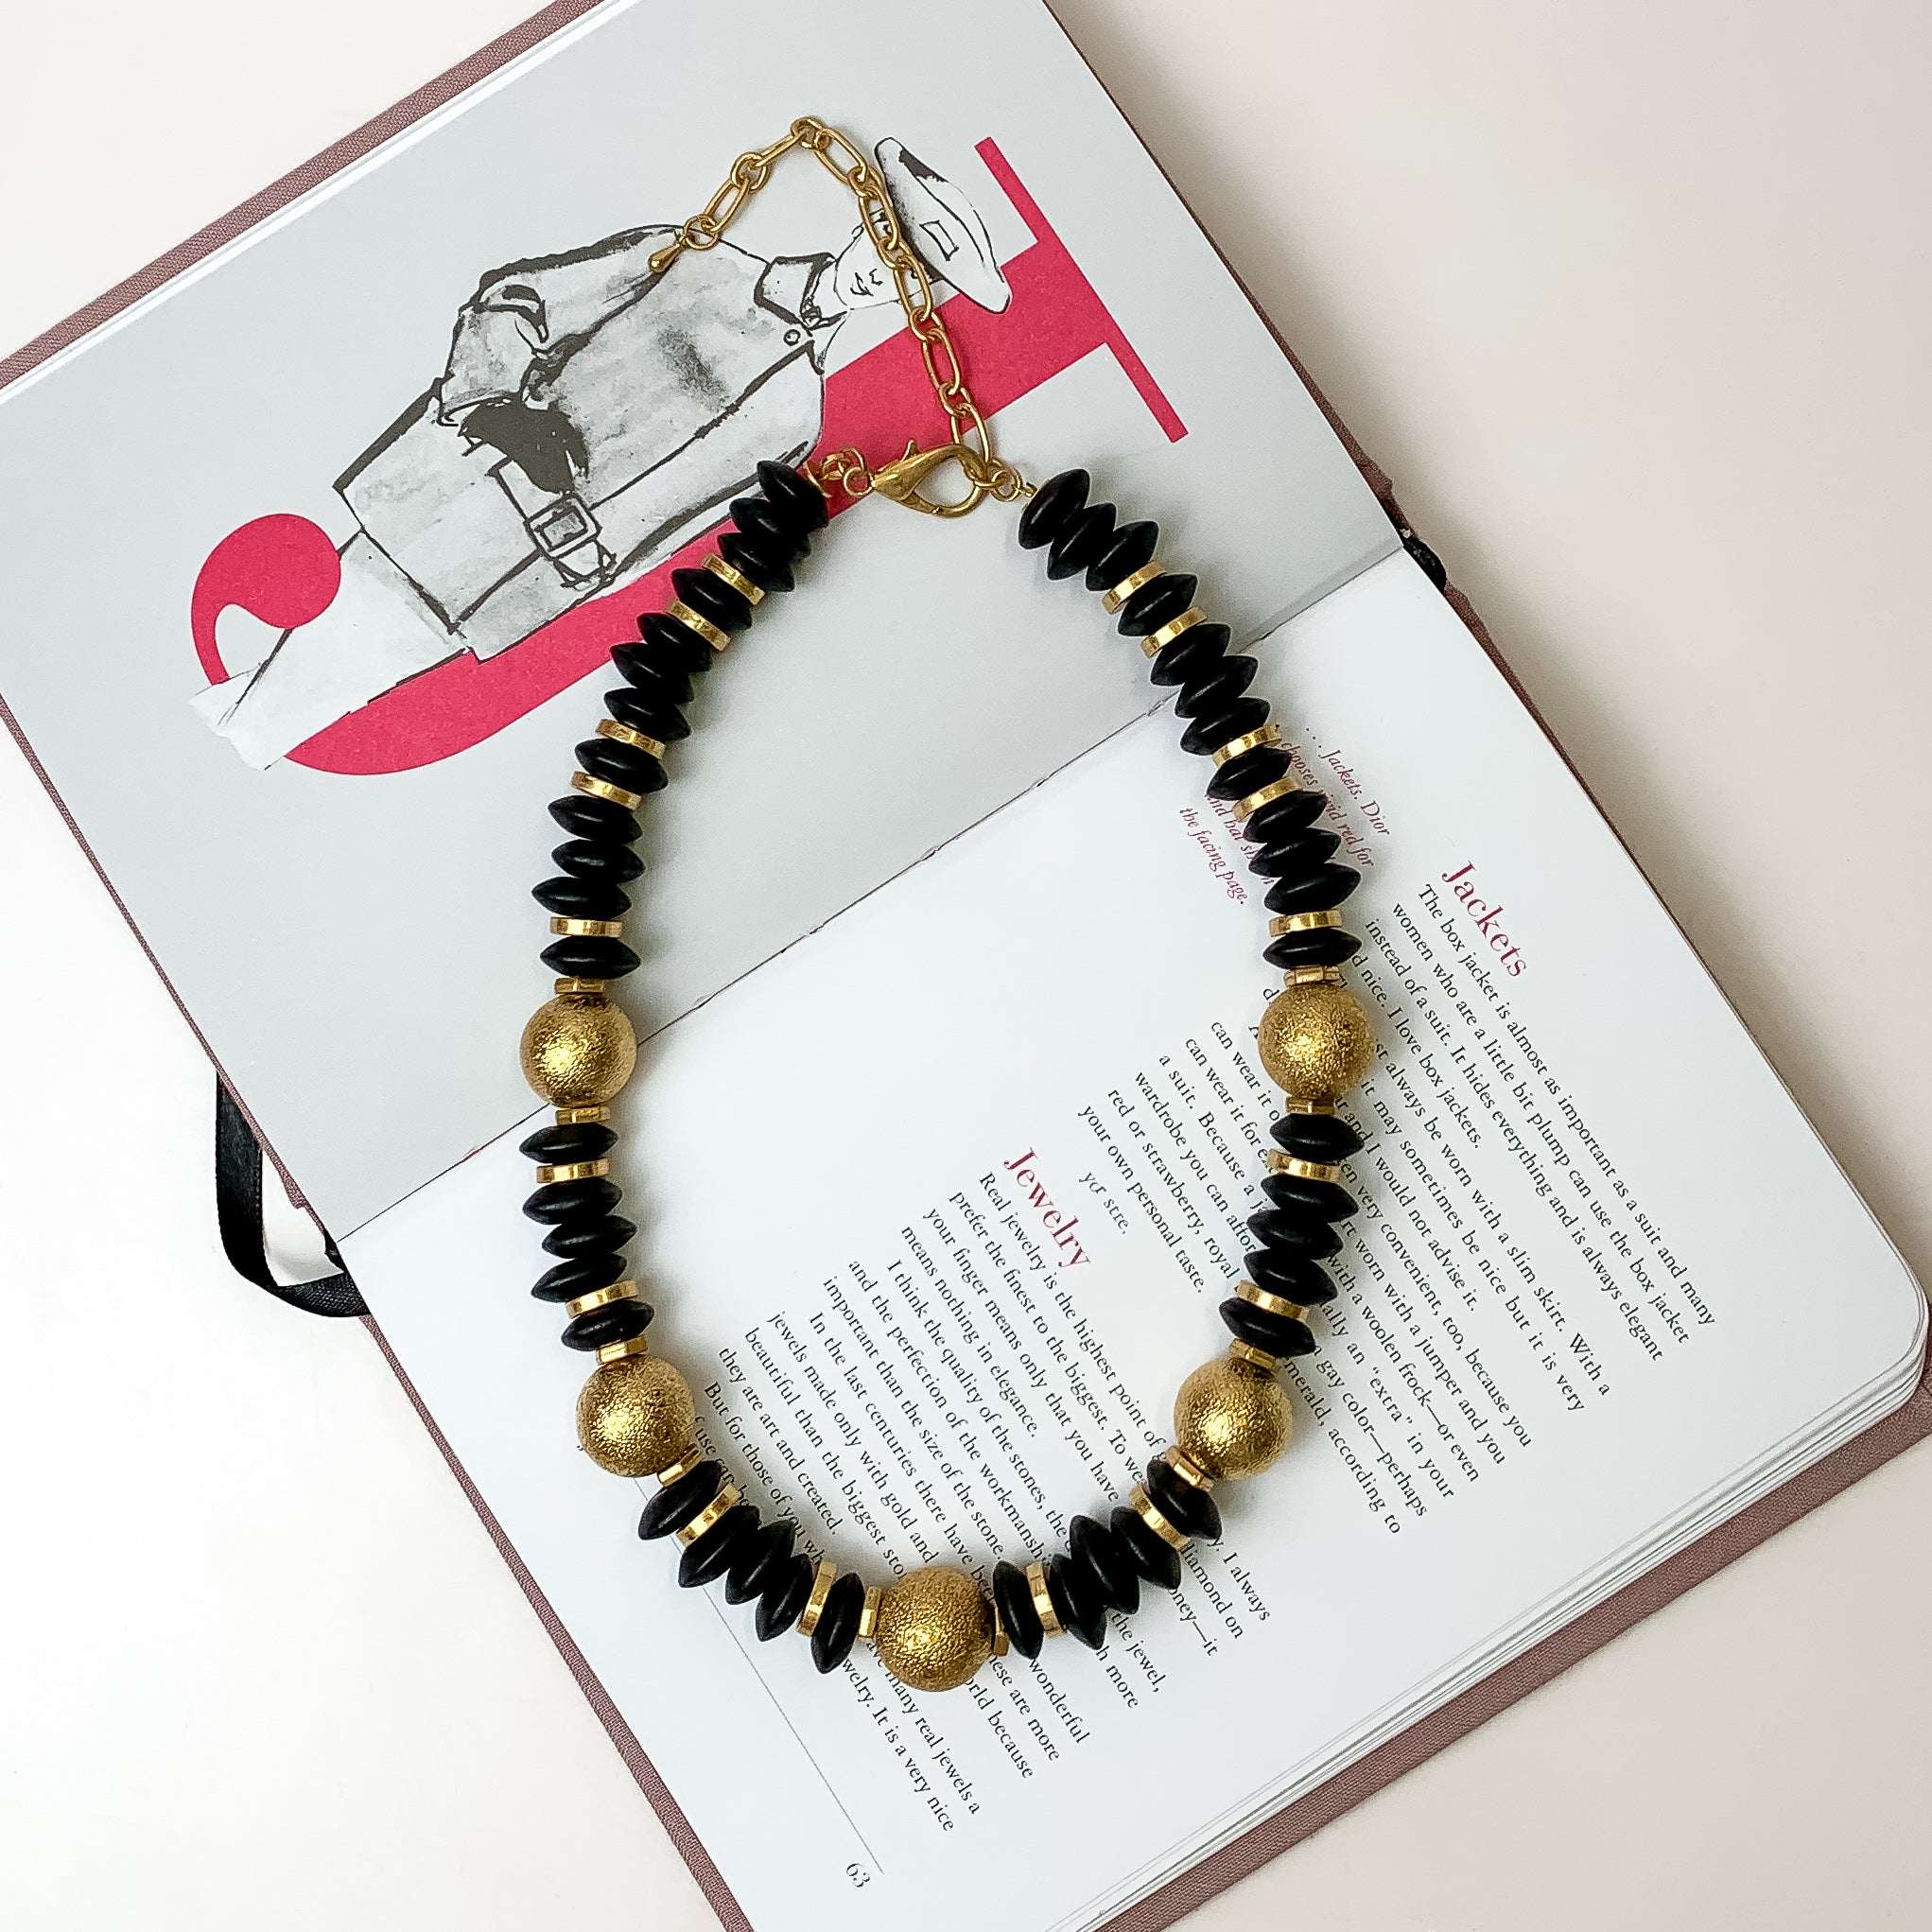 This beaded necklace with gold spacers in the color black is placed inside the pages of a book with a white background.